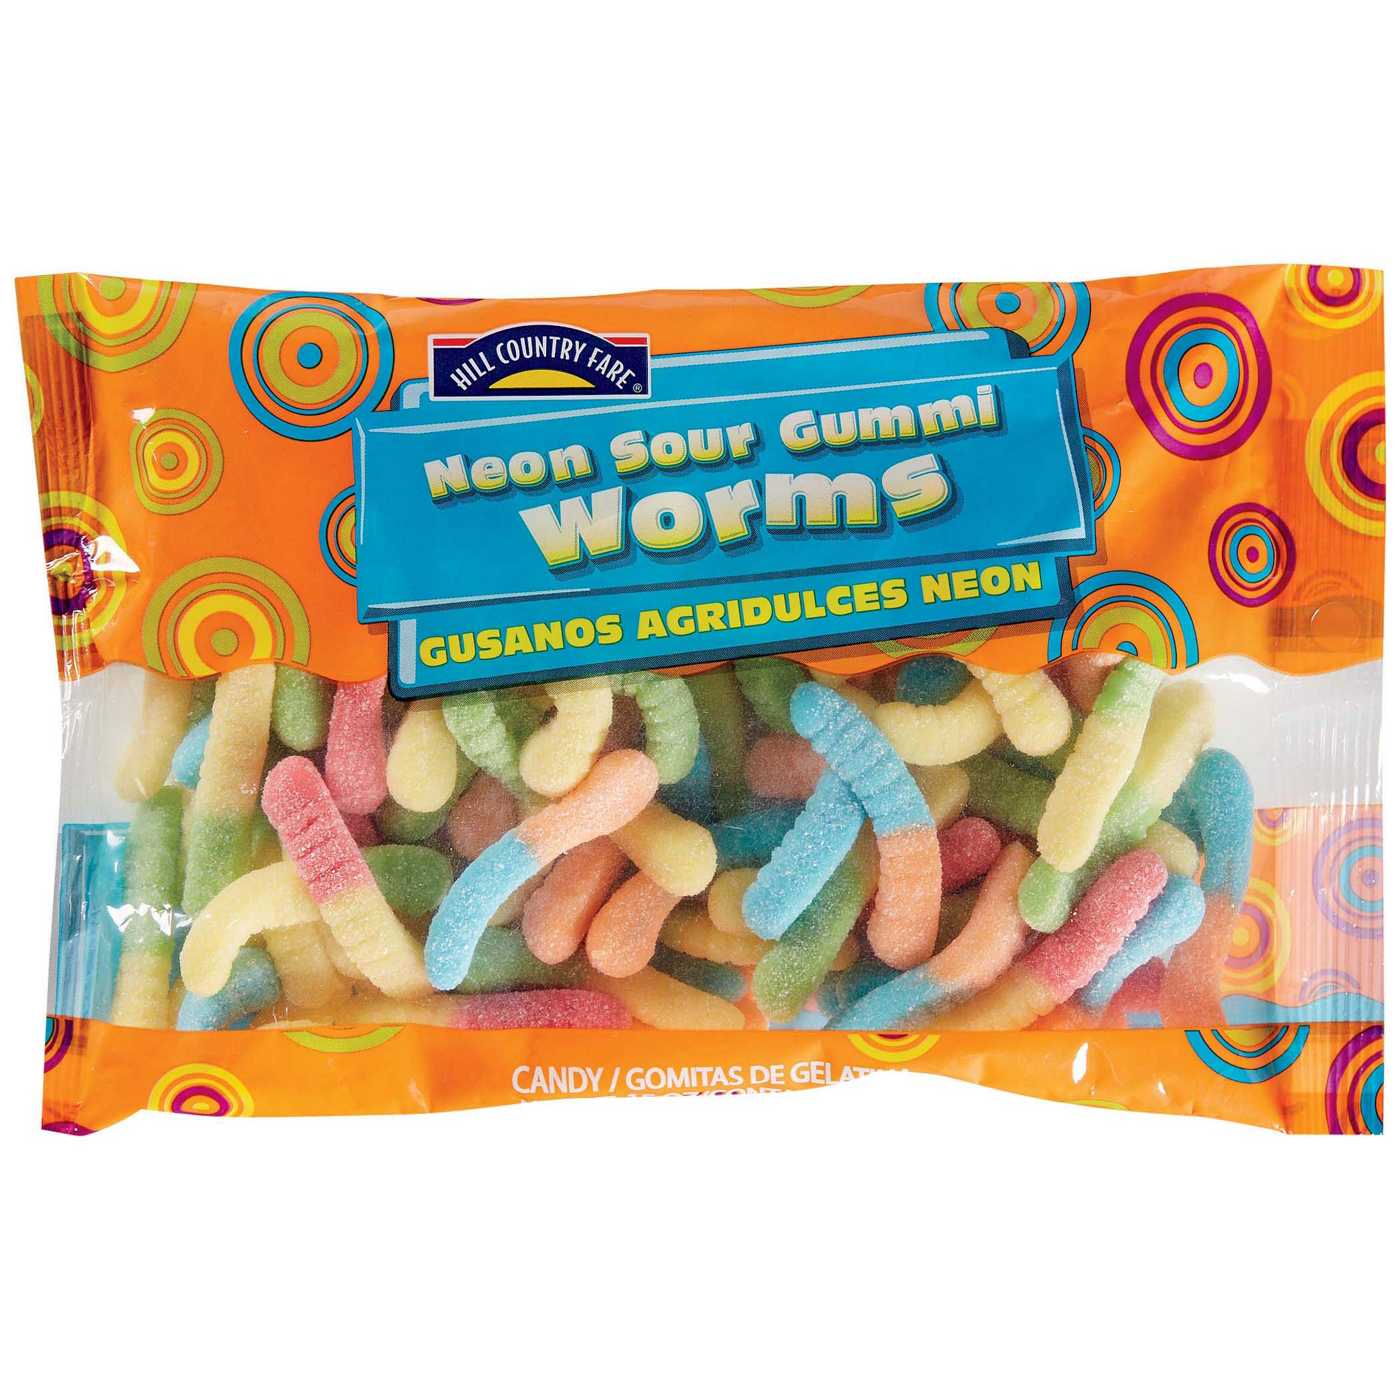 Hill Country Fare Neon Sour Gummi Worms; image 1 of 2